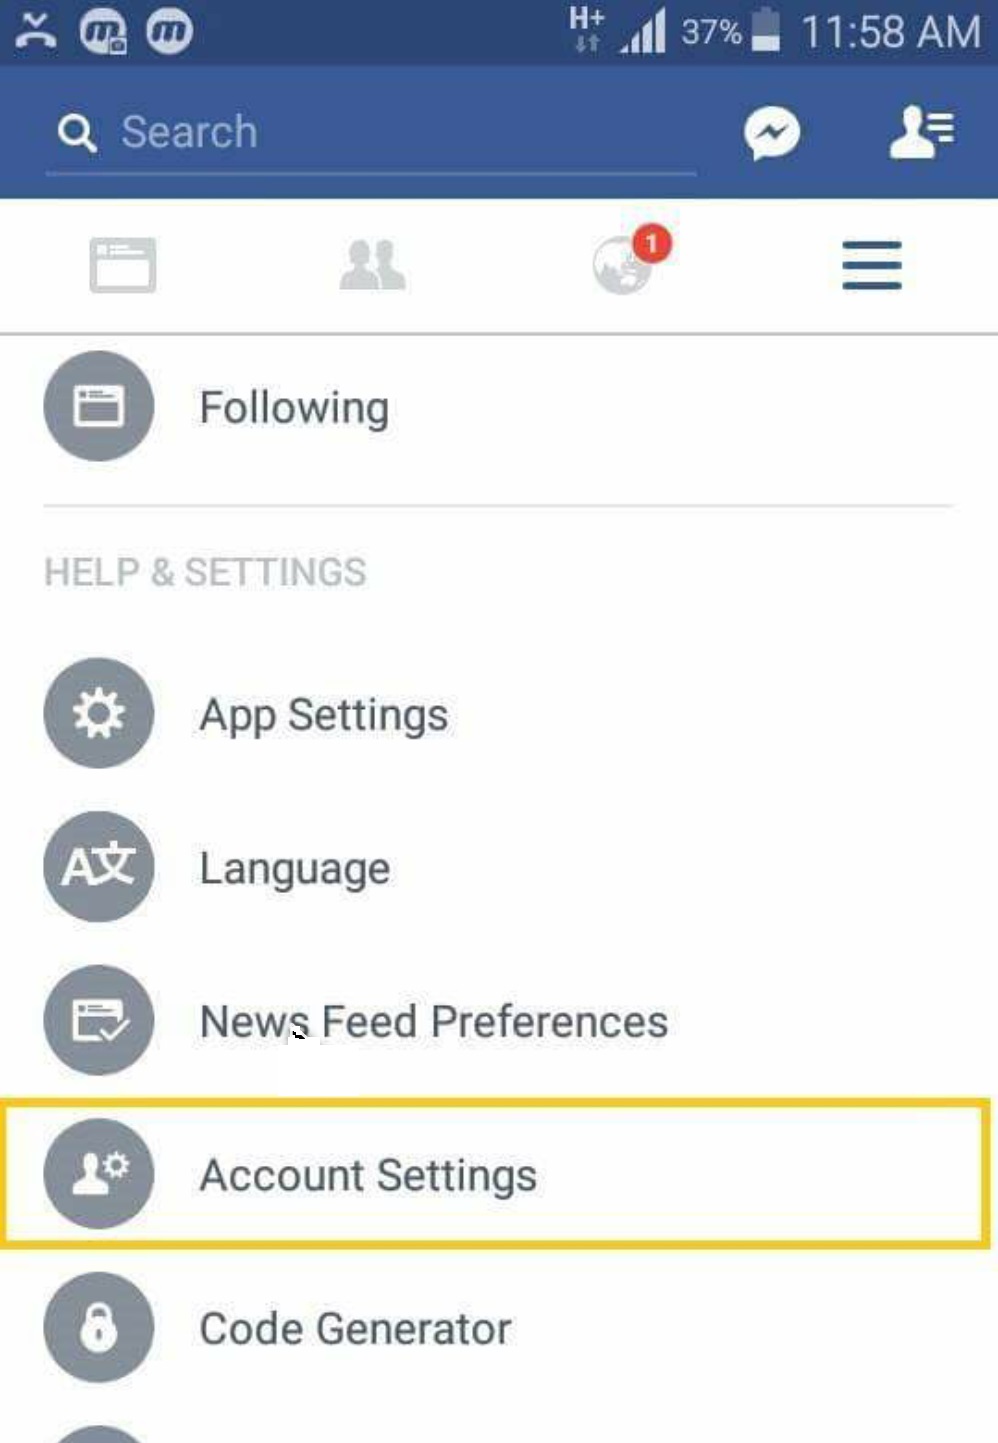 Please select Account setting to adjust the privacy on the telephone number and email address on Facebook app, please go to Menu icon and then select Account setting.